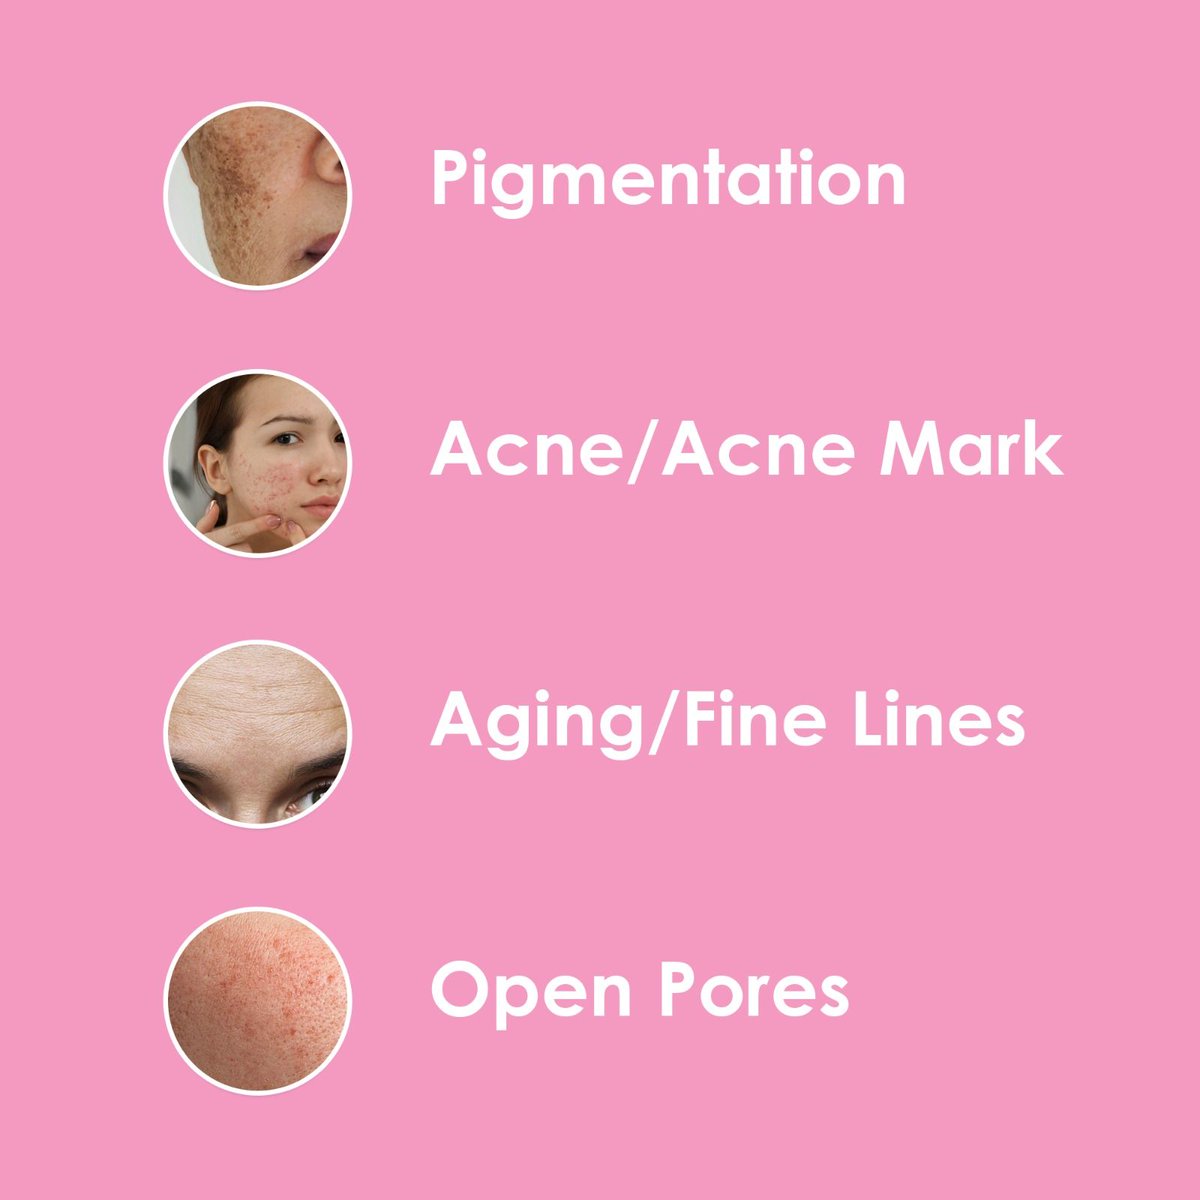 At Renisa Elegance Skin Clinic, we understand that every skin is unique. Whether it's pigmentation, acne marks, aging signs, open pores, dryness, or any other concern,

#RenisaElegance #SkinClinic #HairClinic #AdvancedSkincare #DeepCleansing #AcneScarTreatment #SkinRejuvenation